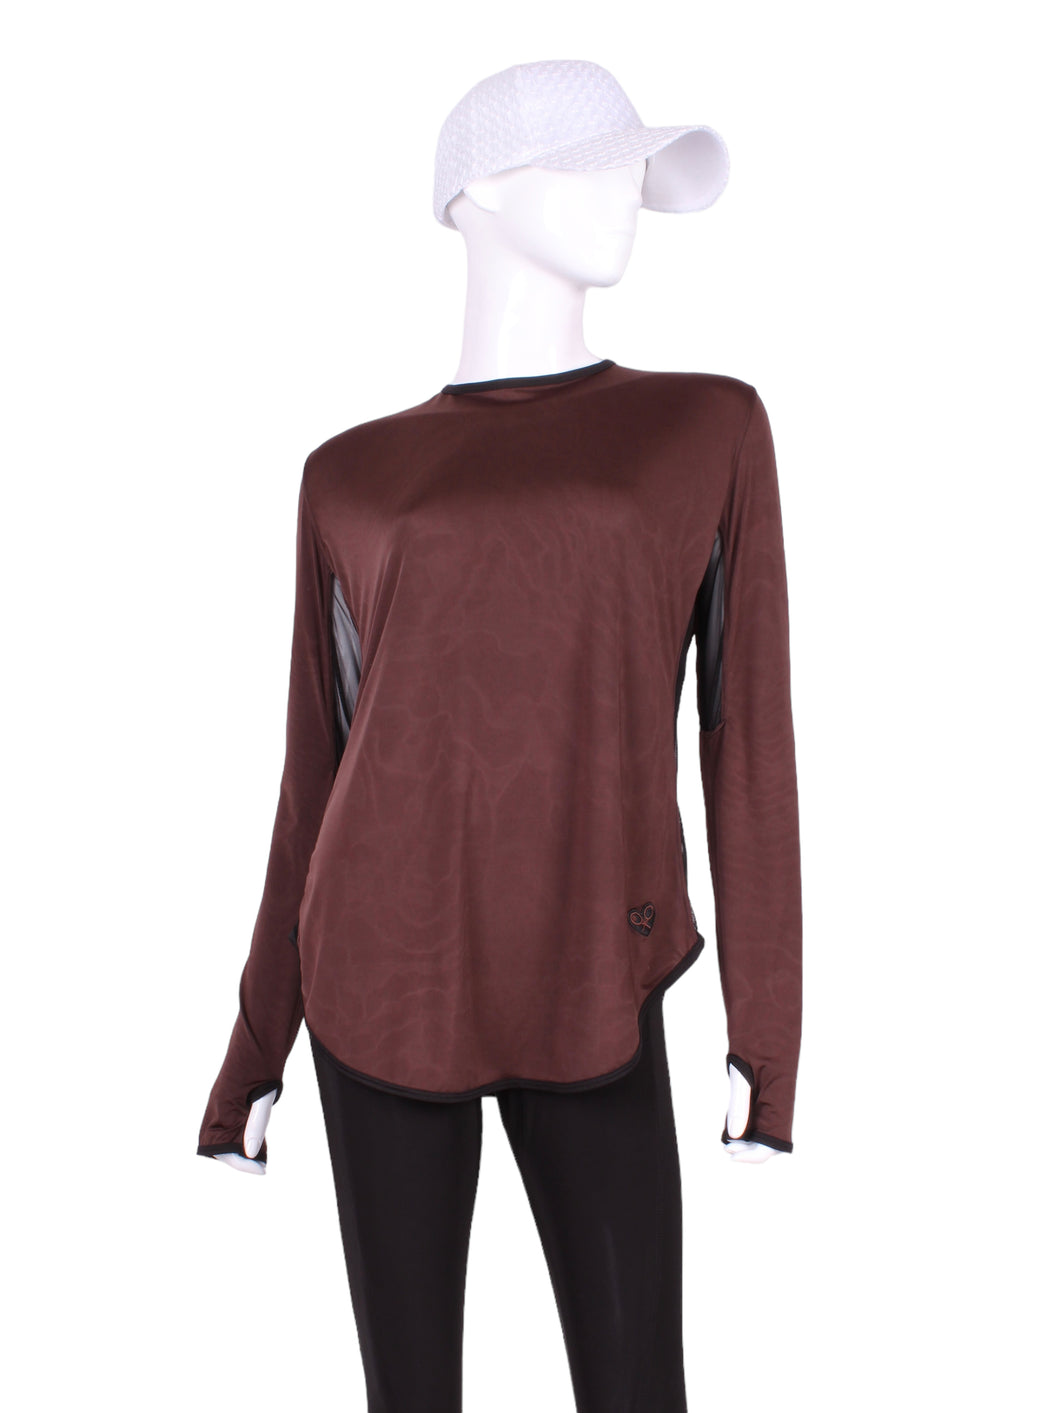 The most coverage of all my tops - with the Long Sleeve Crew Tee you can cover your chest AND your arms and back of hands thanks to the thumb hole.  This top is brown with black mesh to keep you aerated!